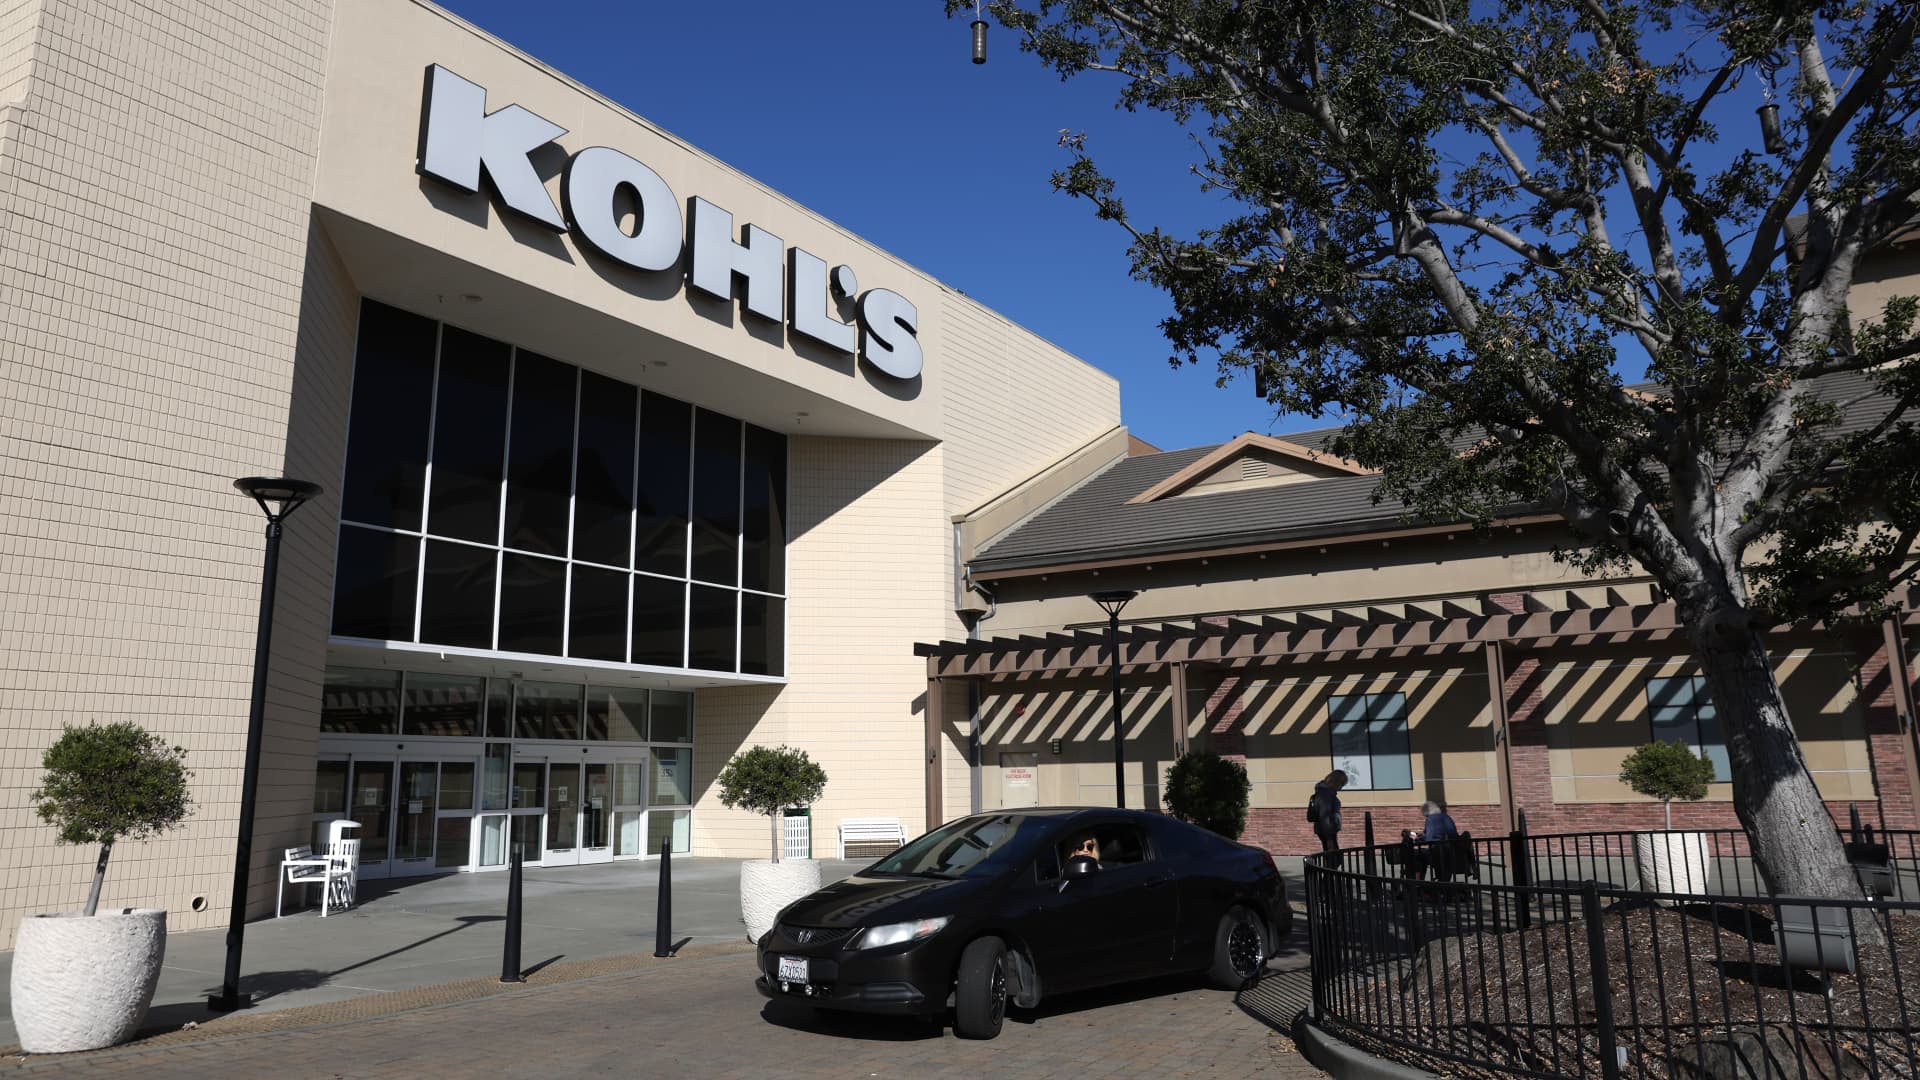 Kohl’s sale negotiations could drag on for weeks, possibly longer